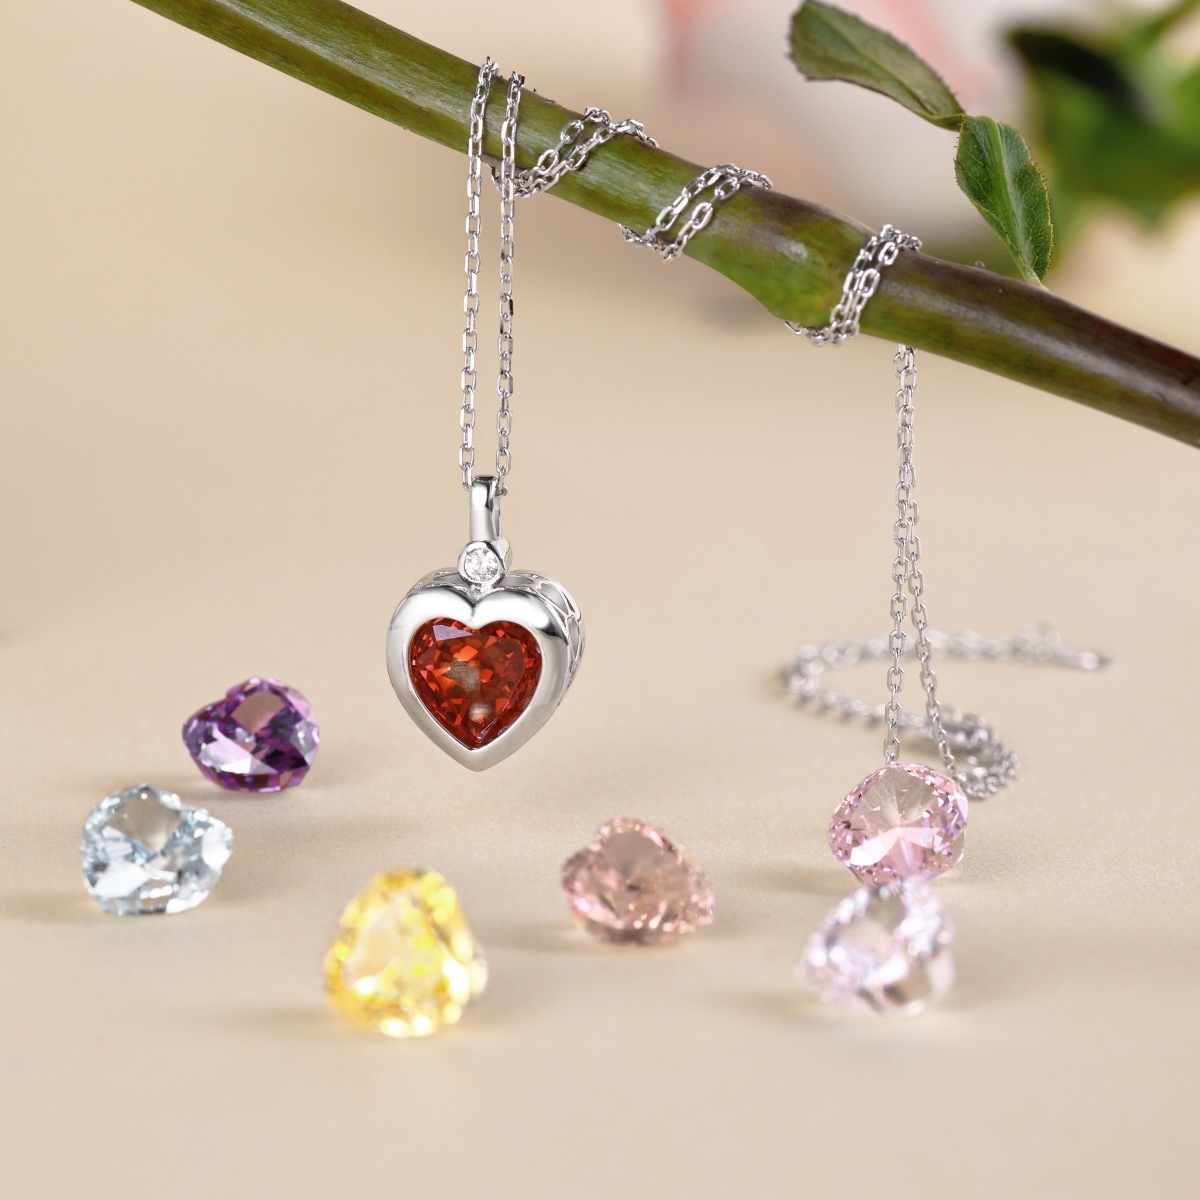 Heart Pendent Necklace